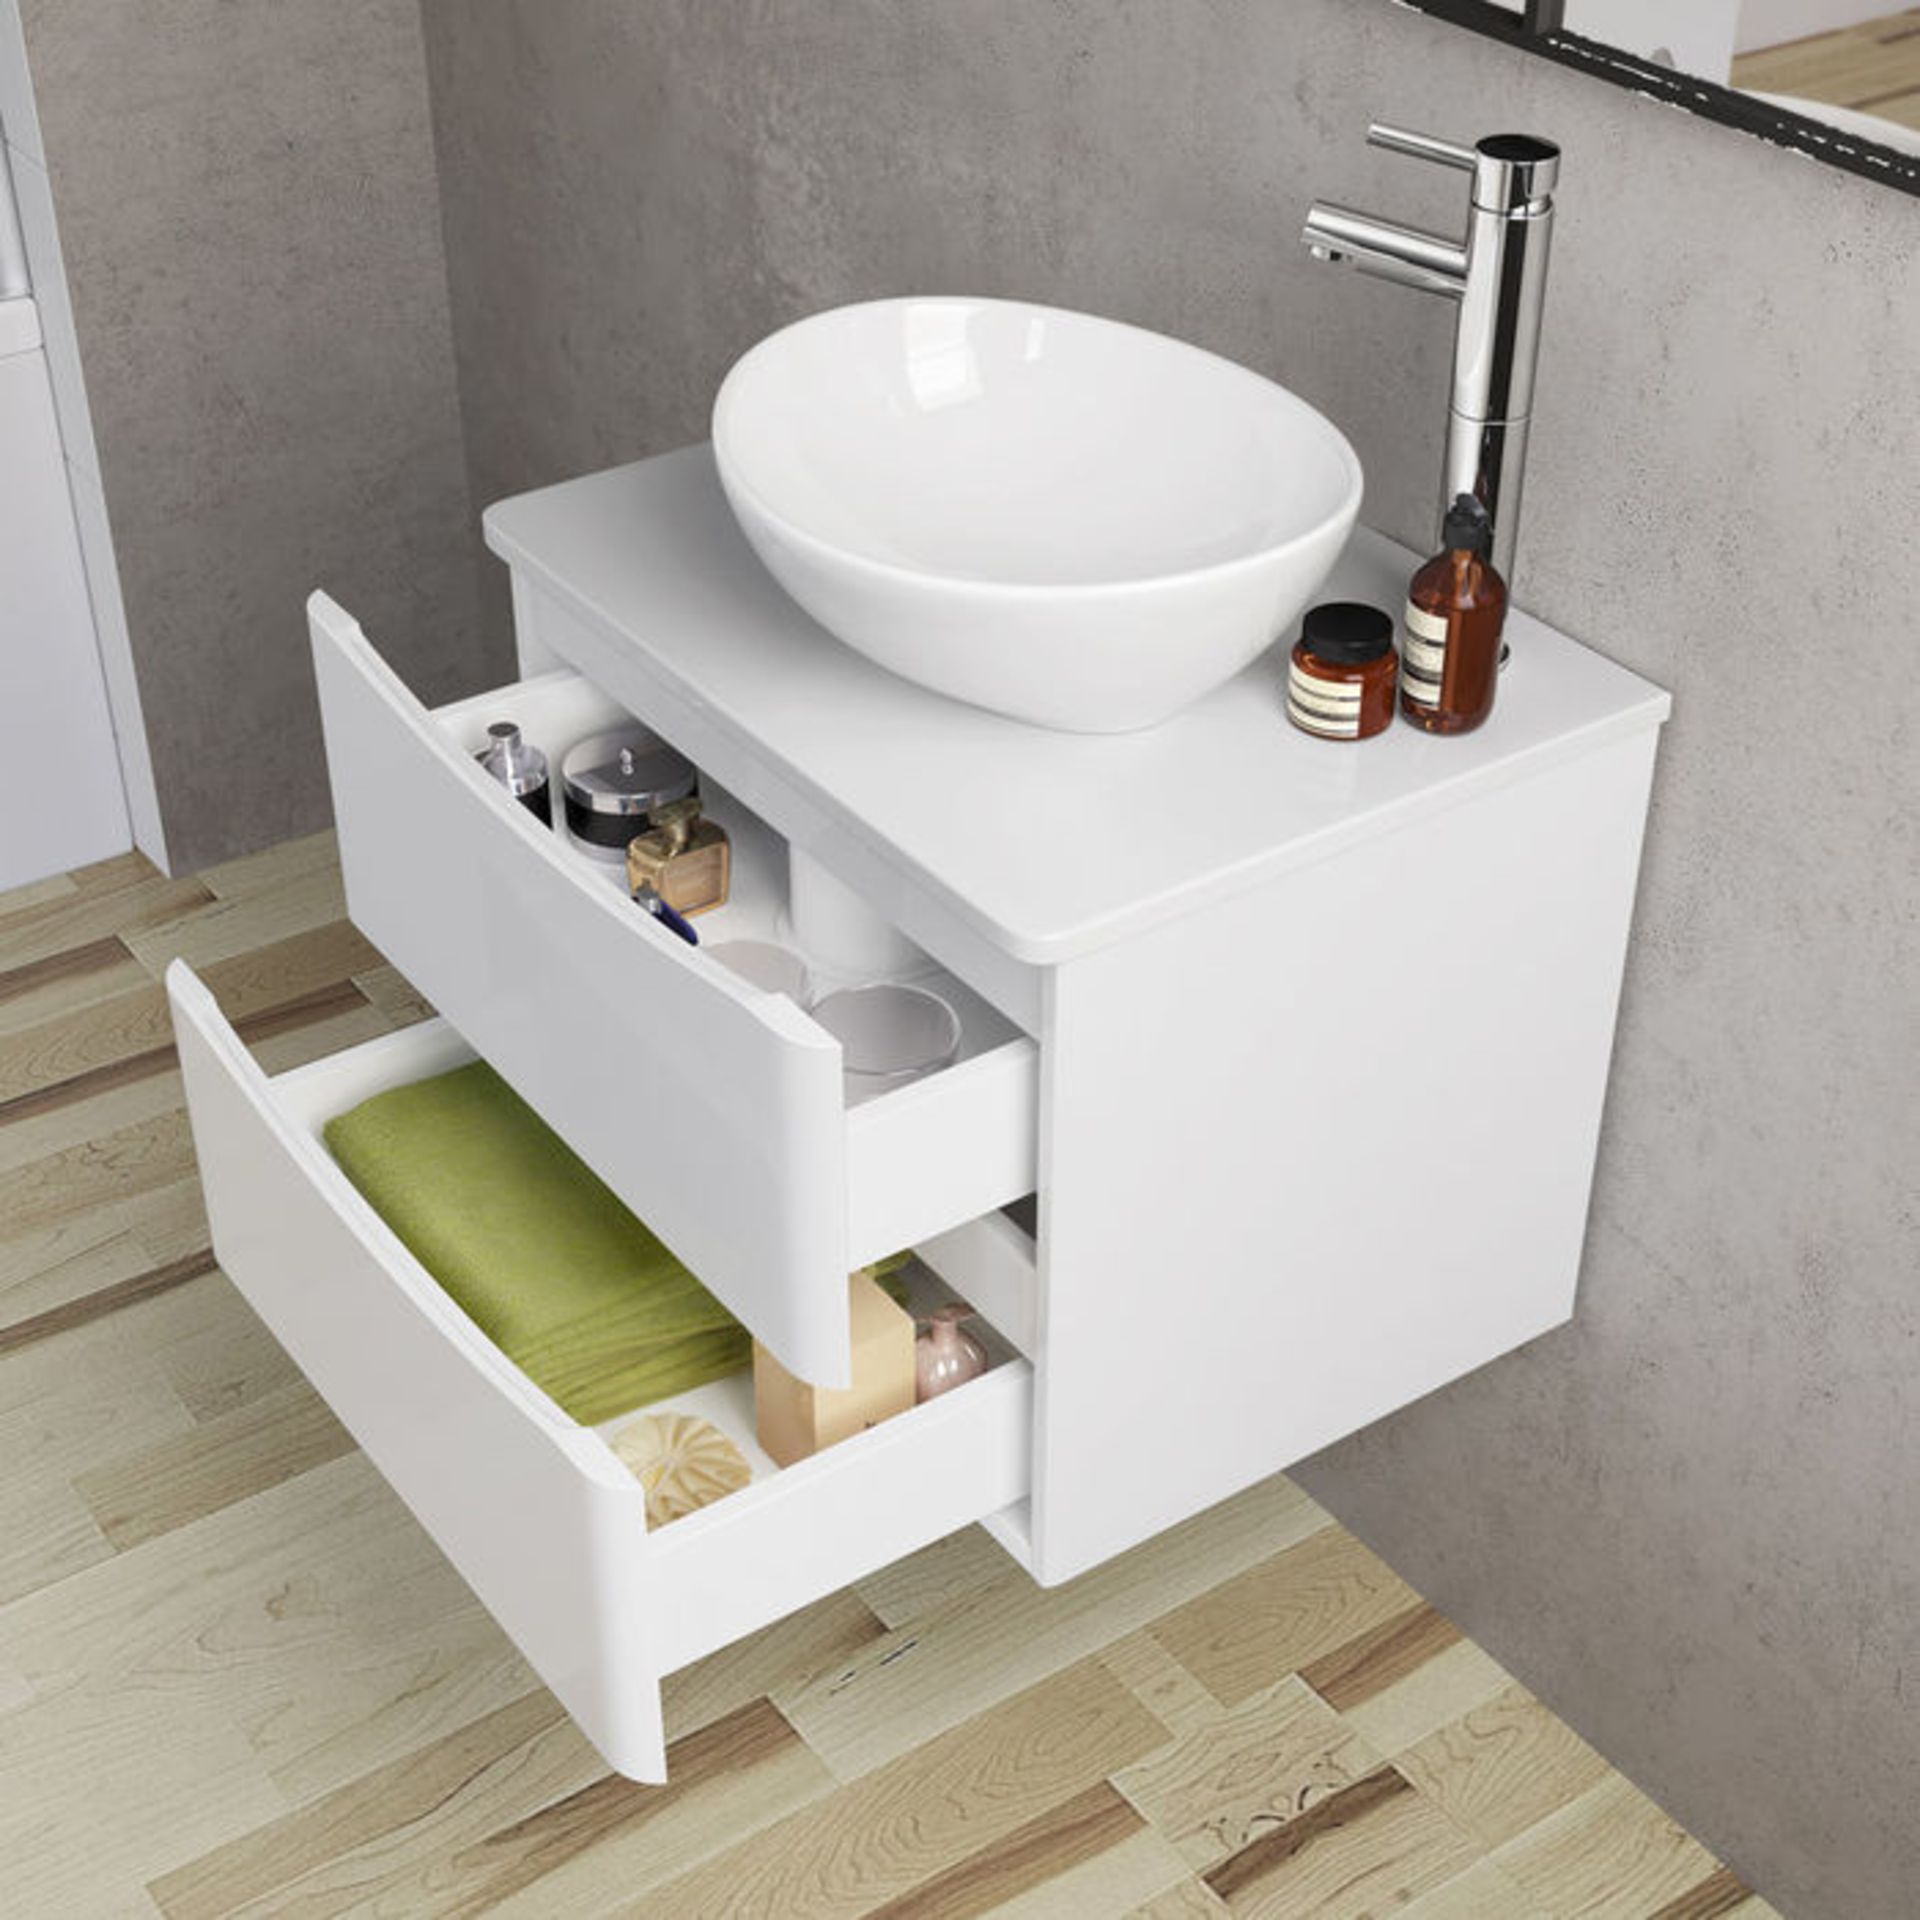 NEW 600mm Austin II Gloss White Countertop Unit and Camila Basin - Wall Hung. RRP £849.99.Come... - Image 3 of 3